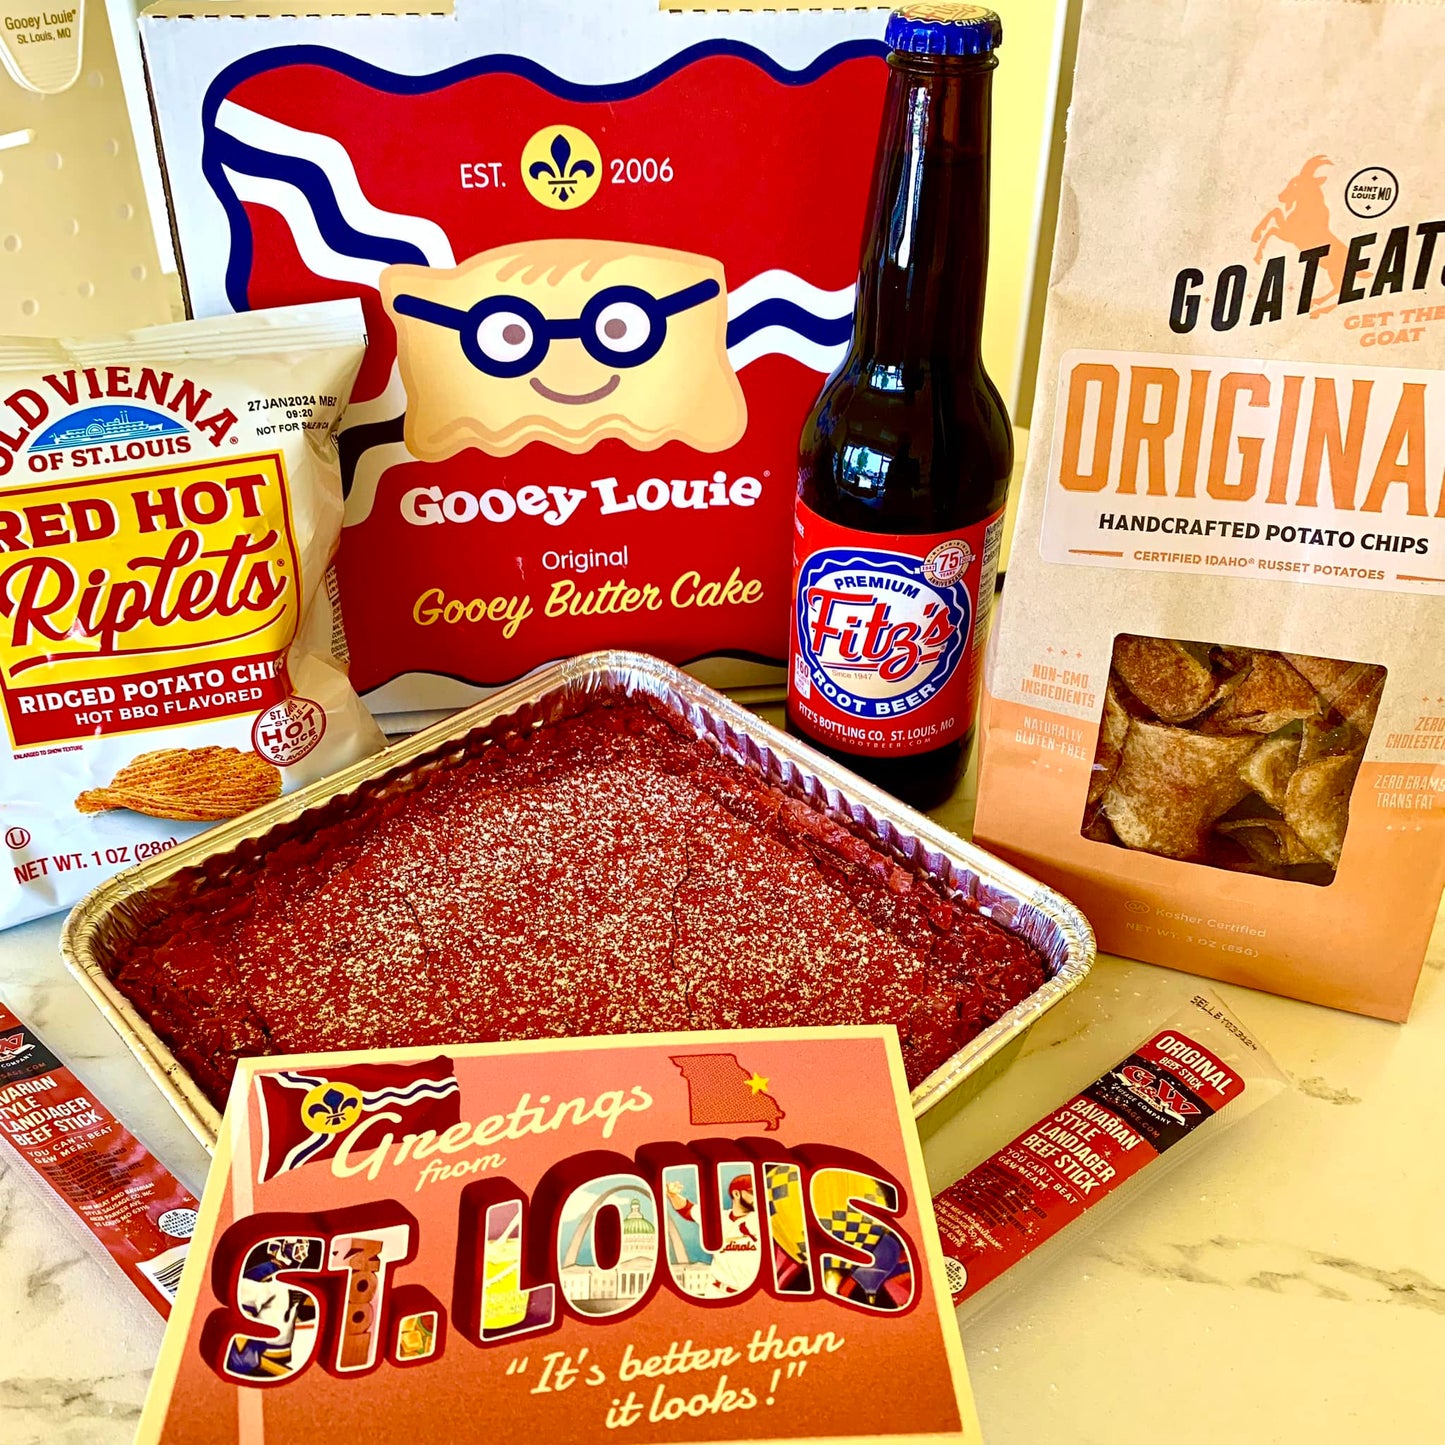 STL 314 DAY Gooey Louie Box– Original Gooey Butter Cake SHIPPING INCLUDED